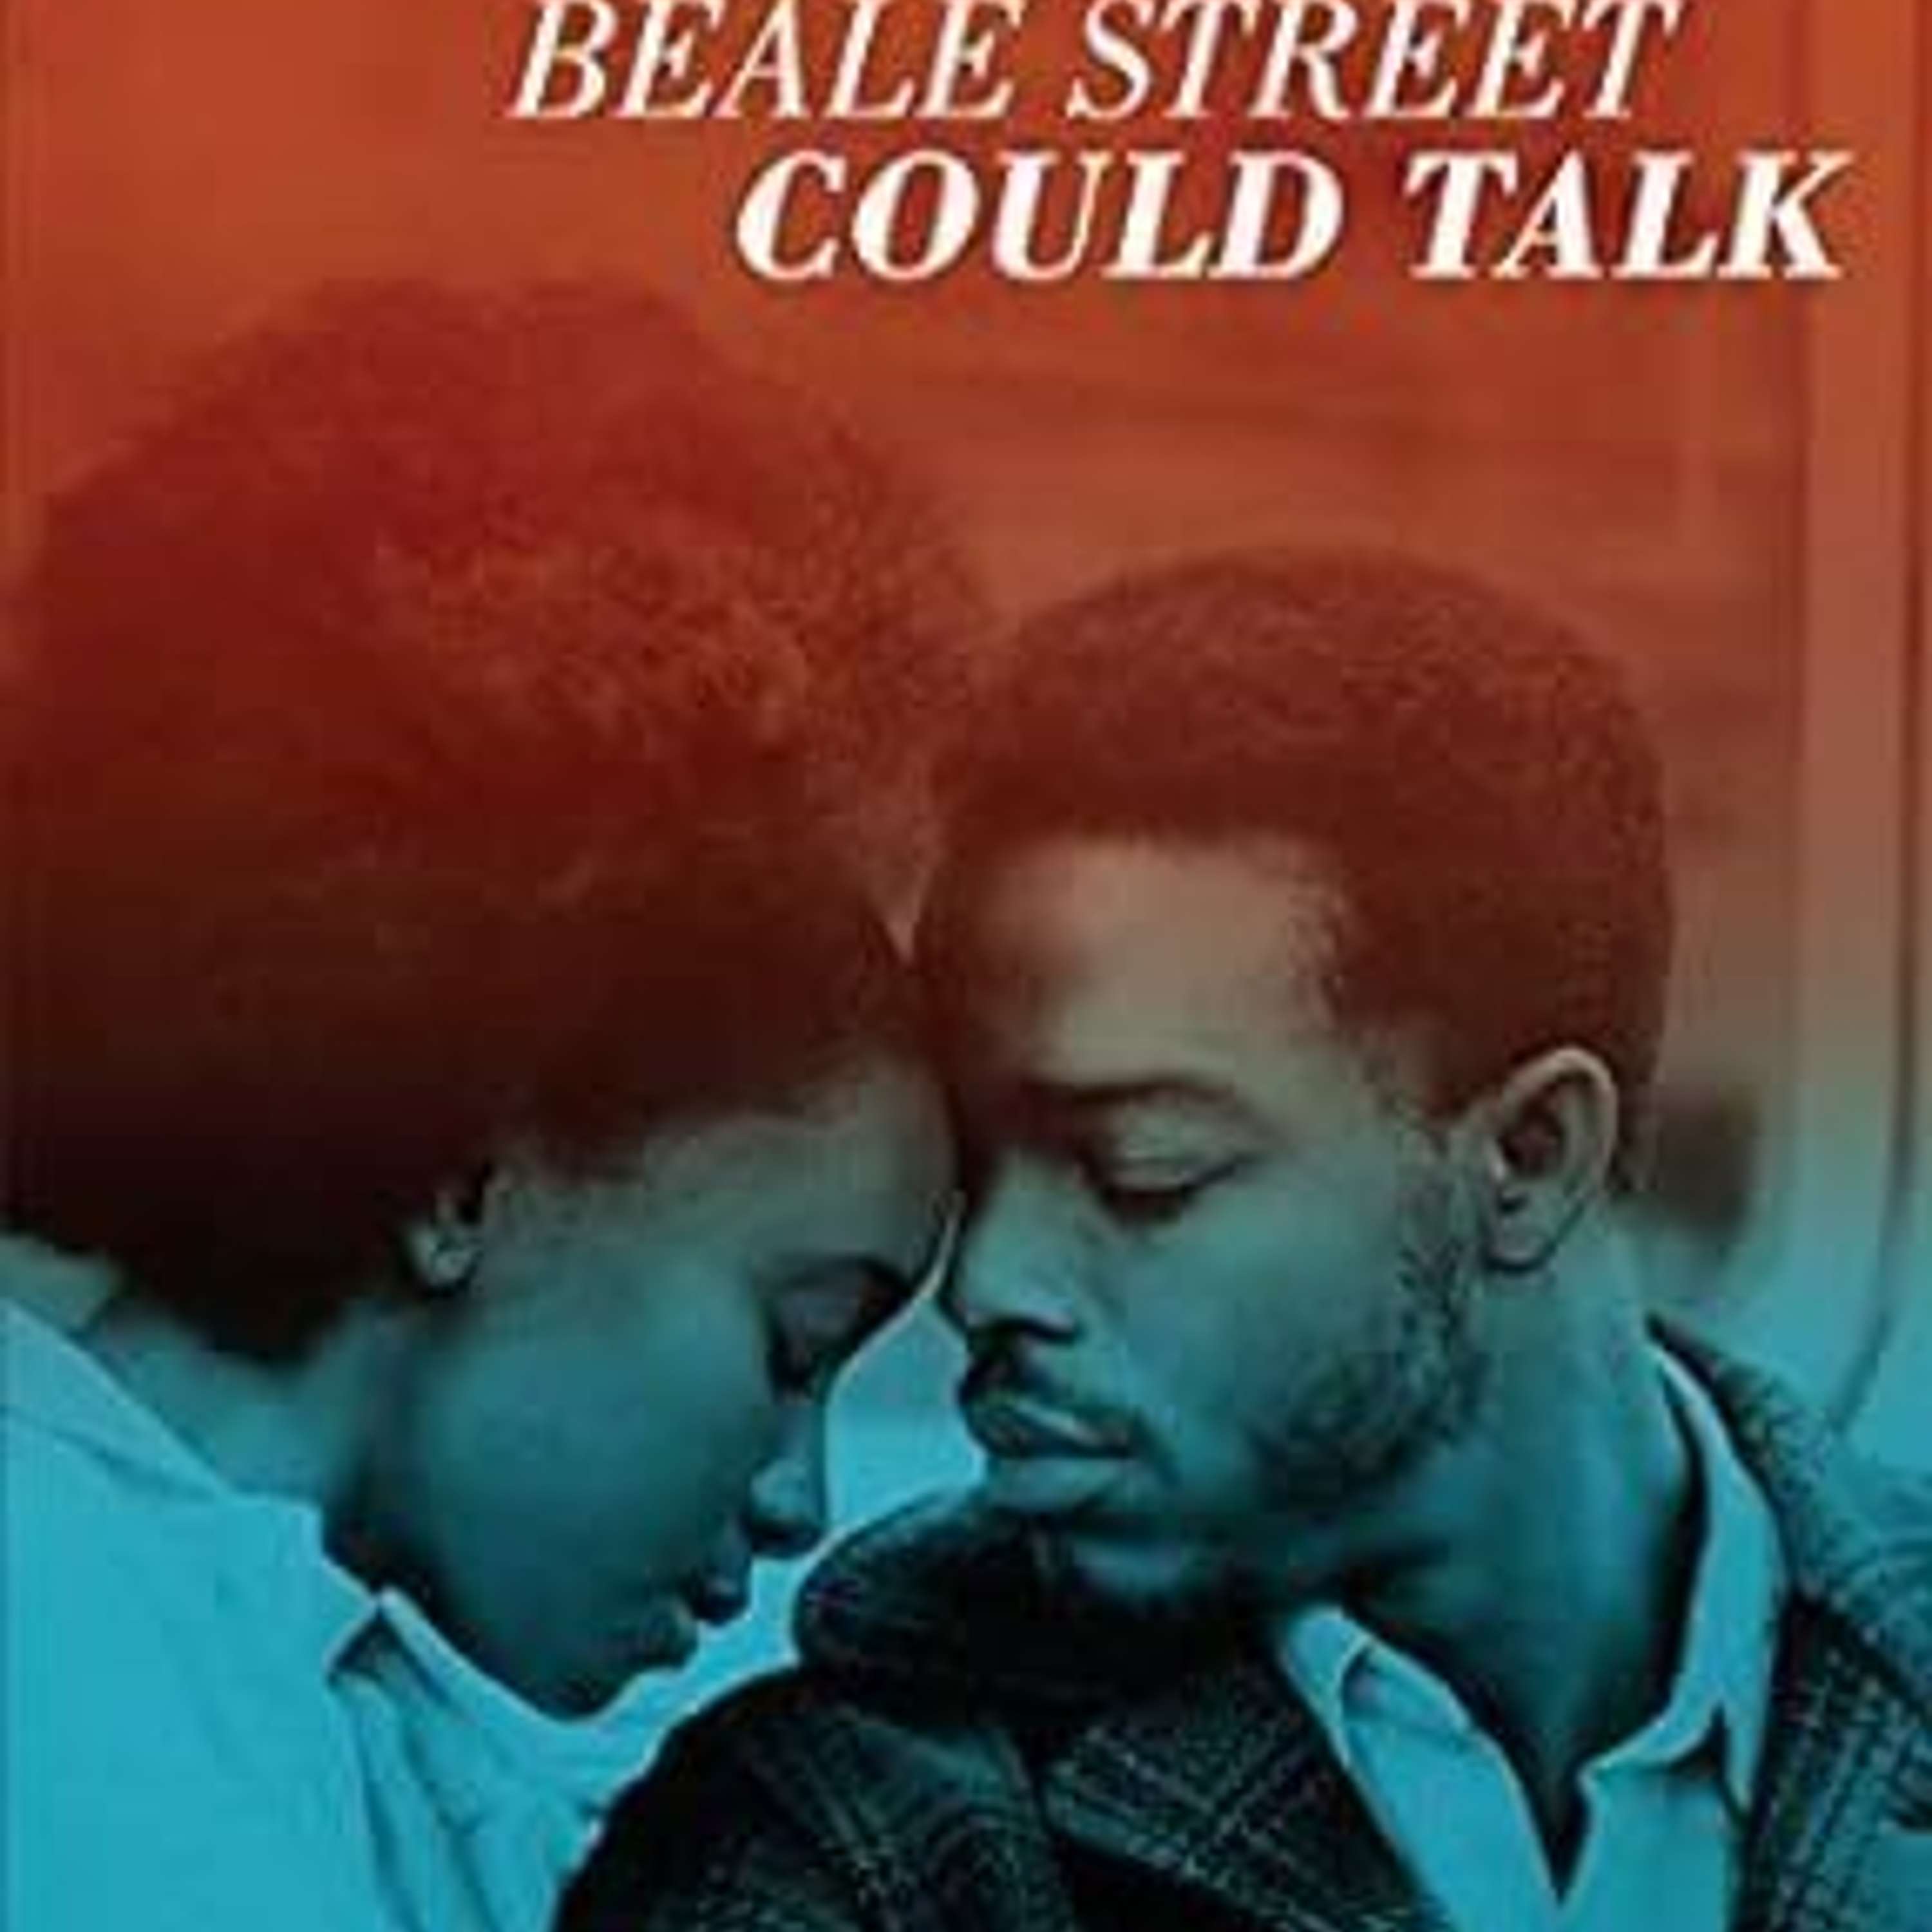 Episode 071: If Beale Street Could Talk